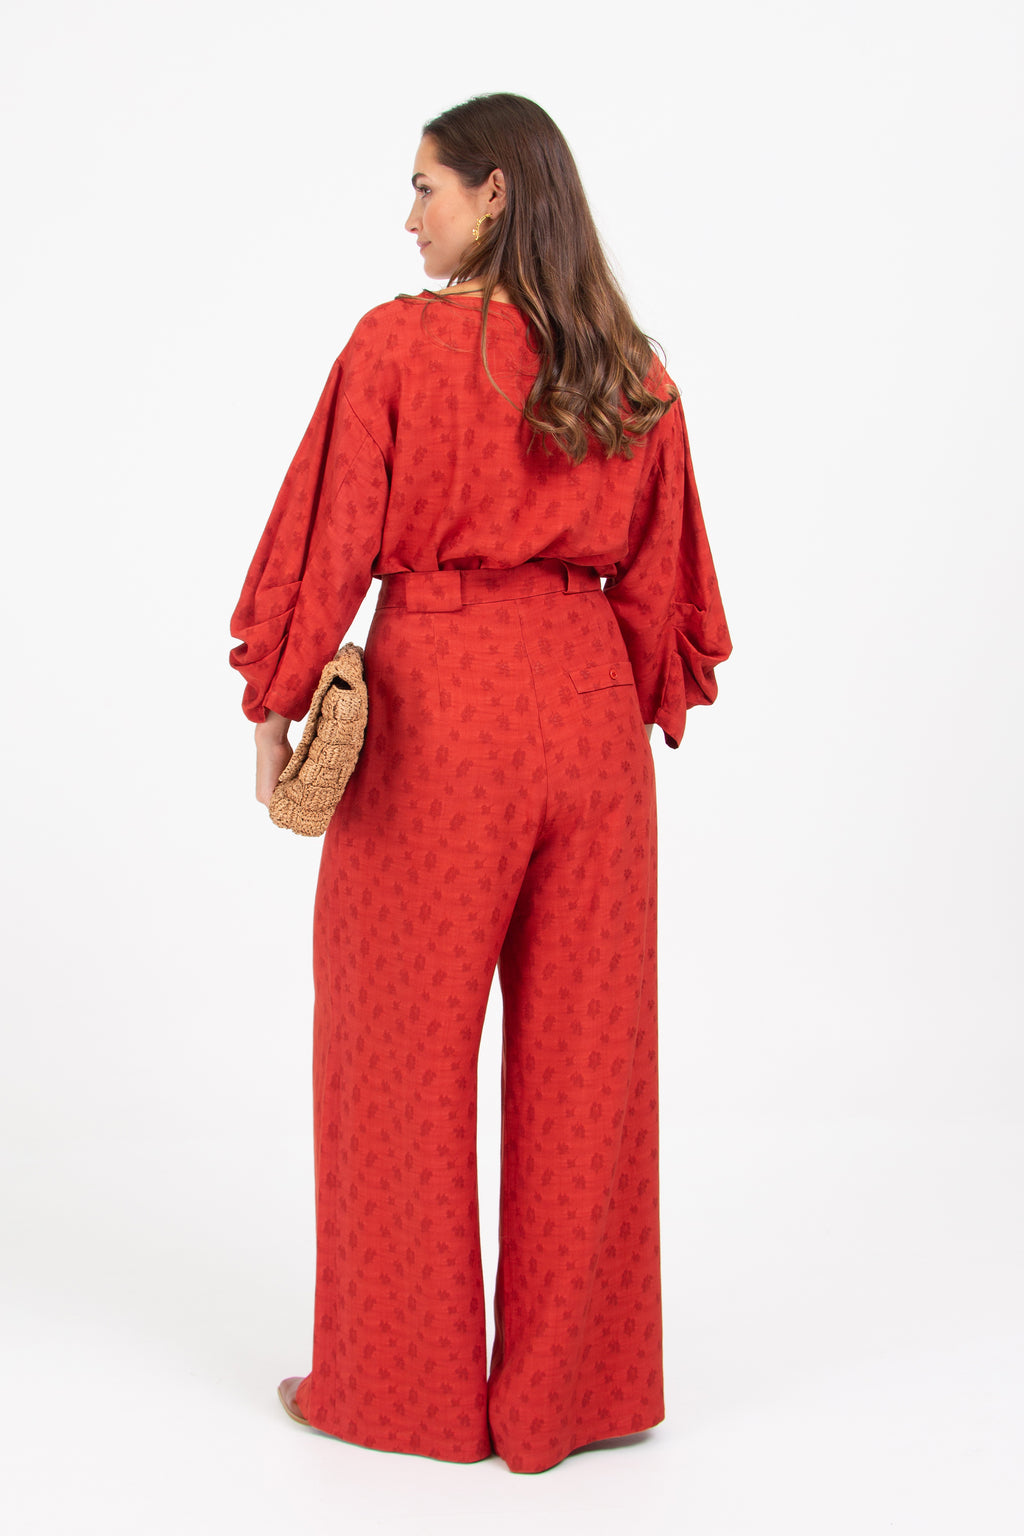 Donny trousers in red woven berries